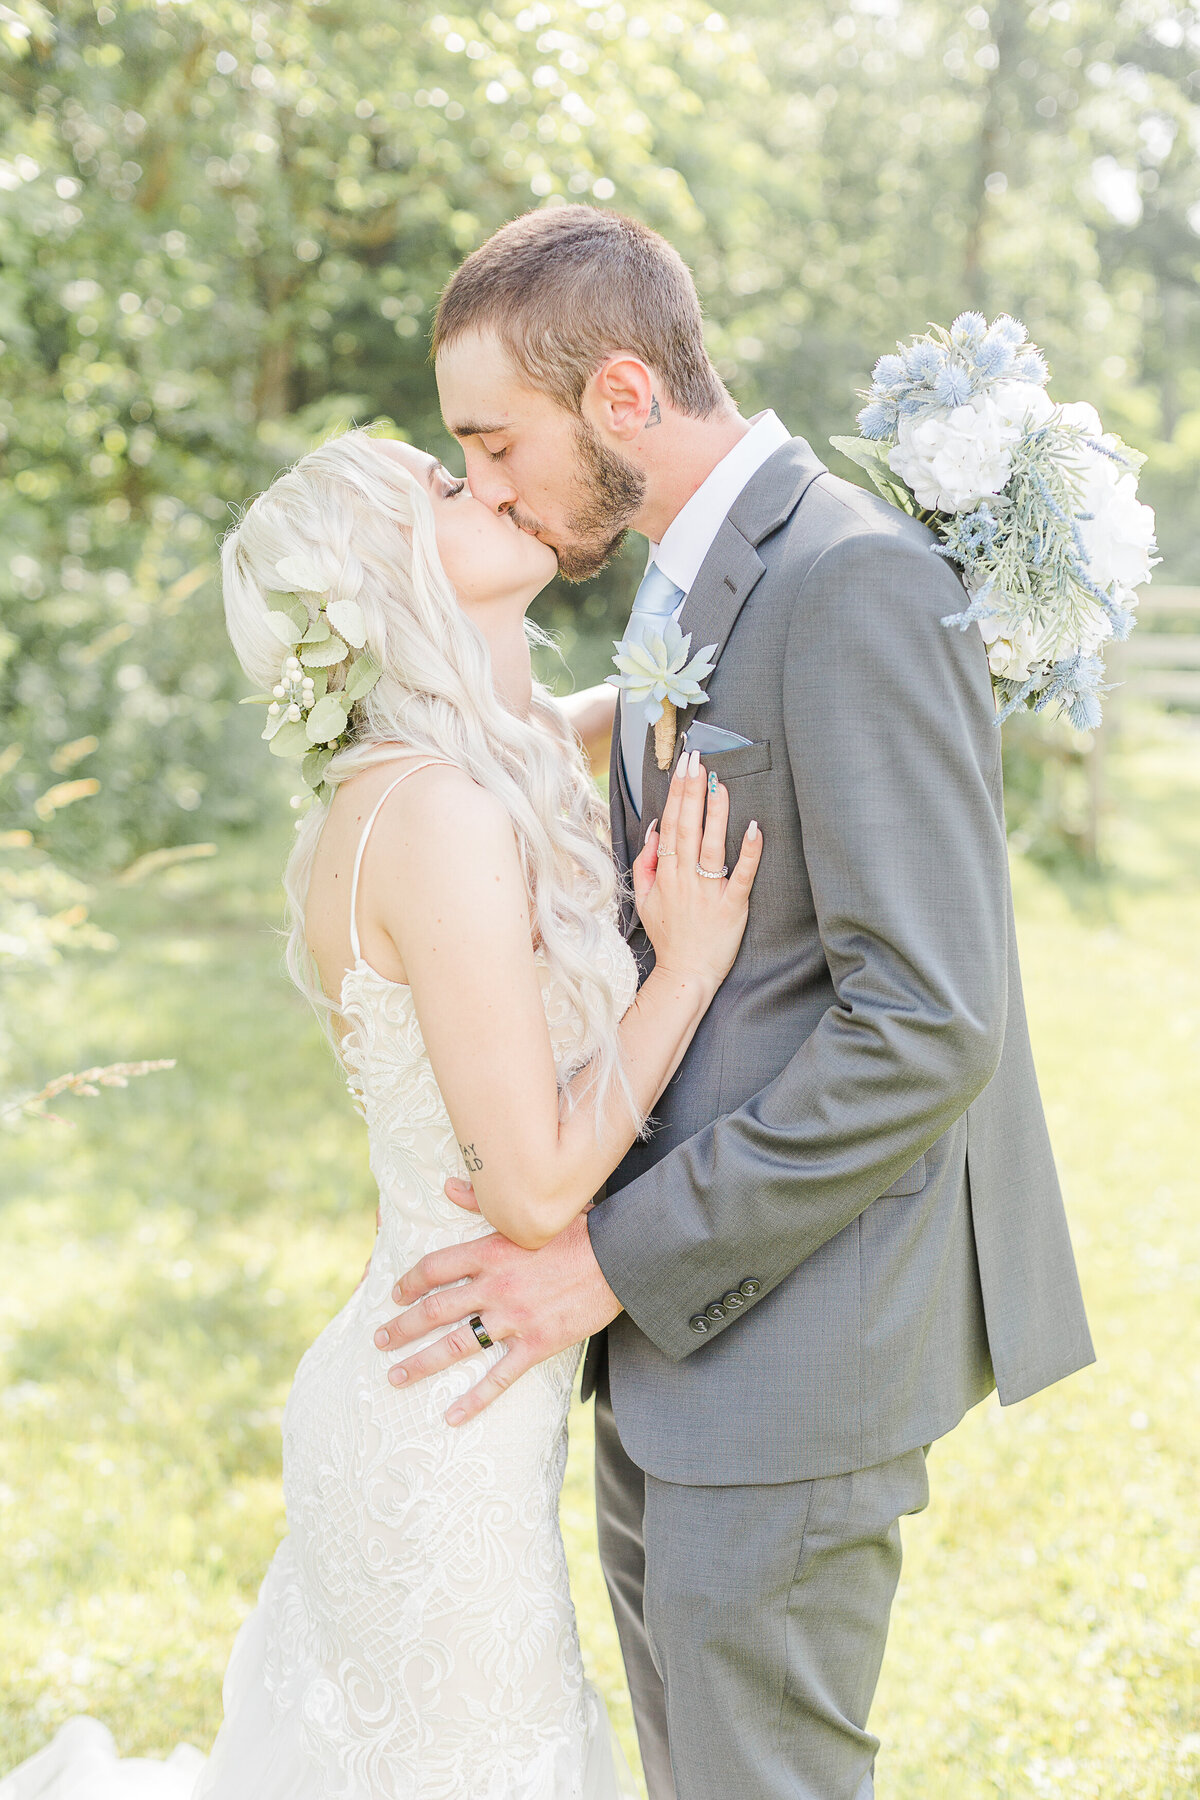 Bride and groom share a kiss in for their formal wedding portraits. The bride's hand is resting on her groom's chest and the other hand has her bouquet draped around his neck. Captured by RI wedding photographer Lia Rose Weddings